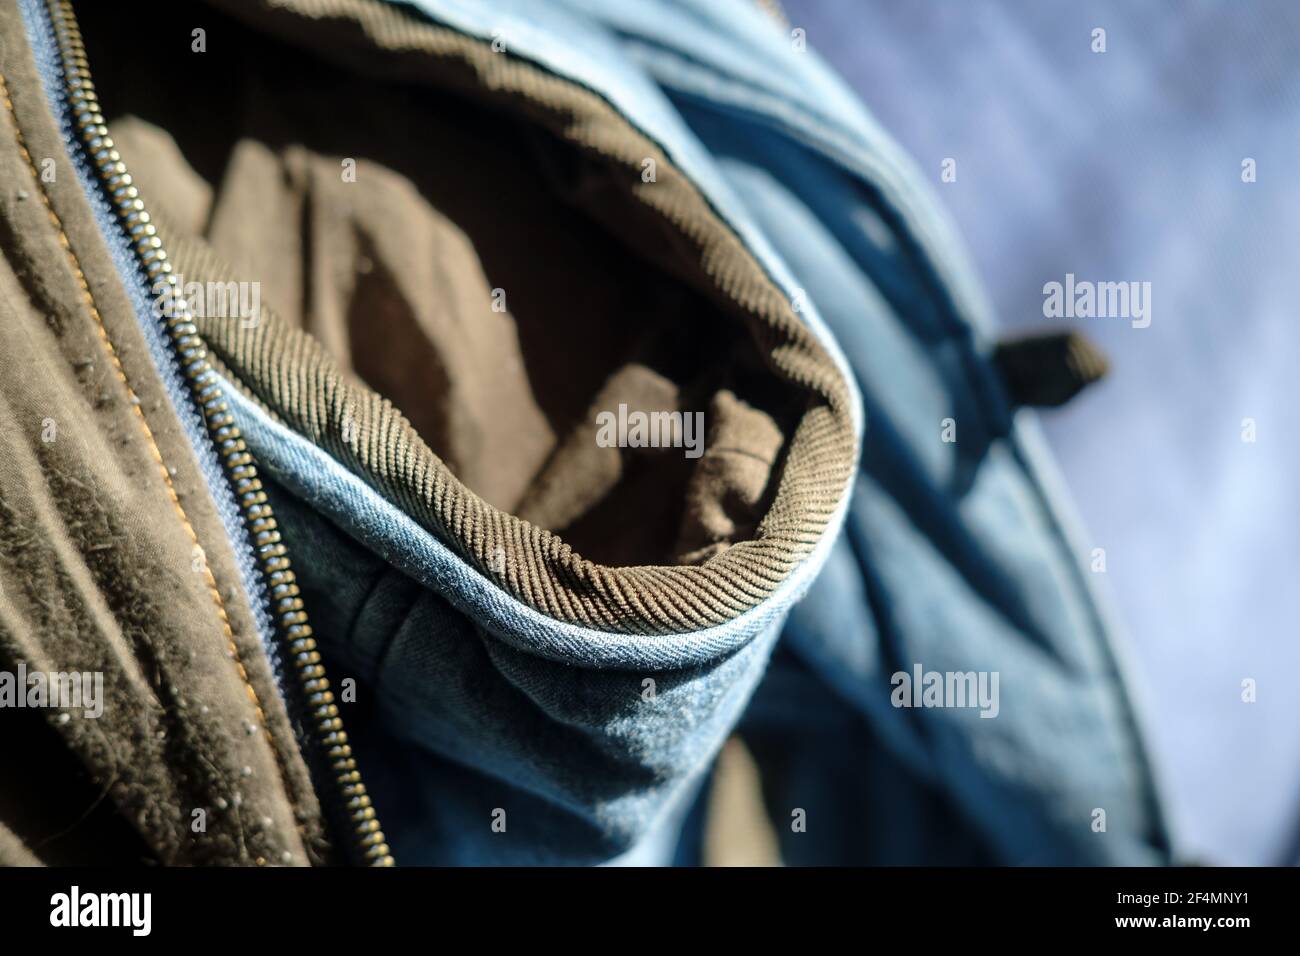 Fragment of a hooded vest with a zipper for clothing, in natural sunlight. Clothing repair concept.  Stock Photo